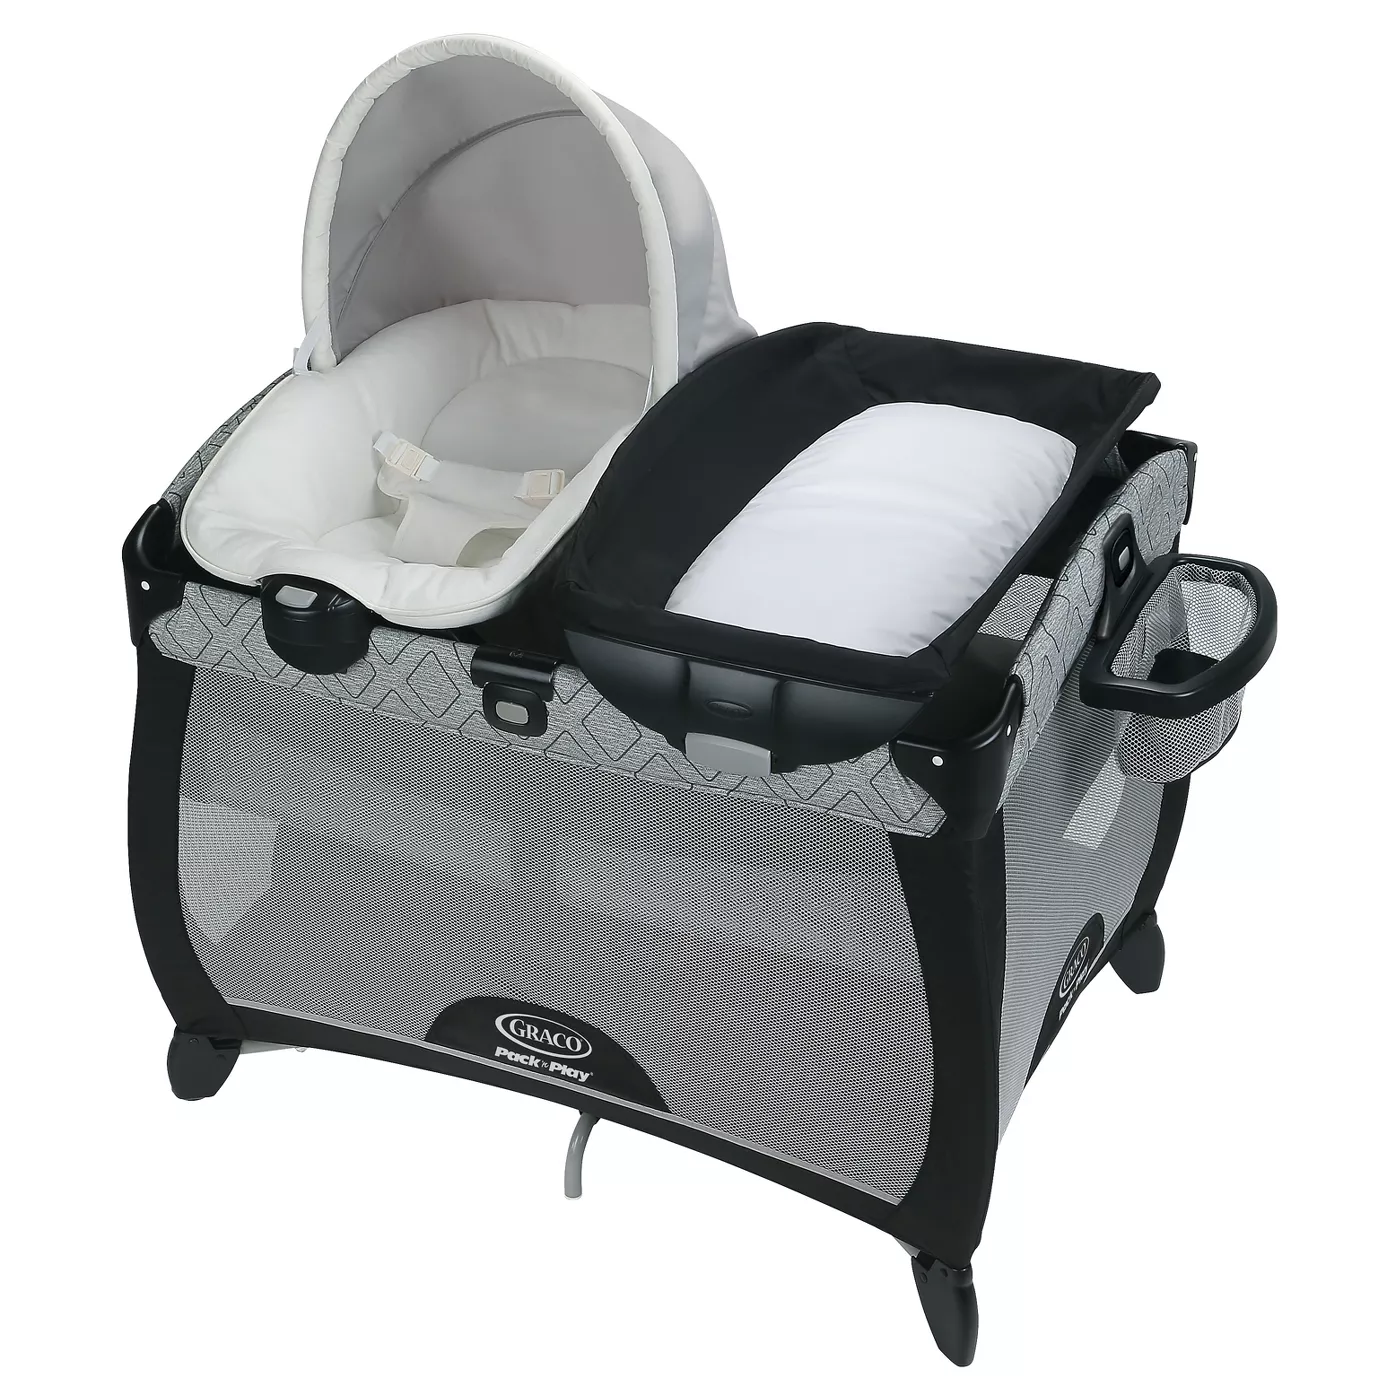 Graco Quick Connect Portable Seat - Asher - image 1 of 9